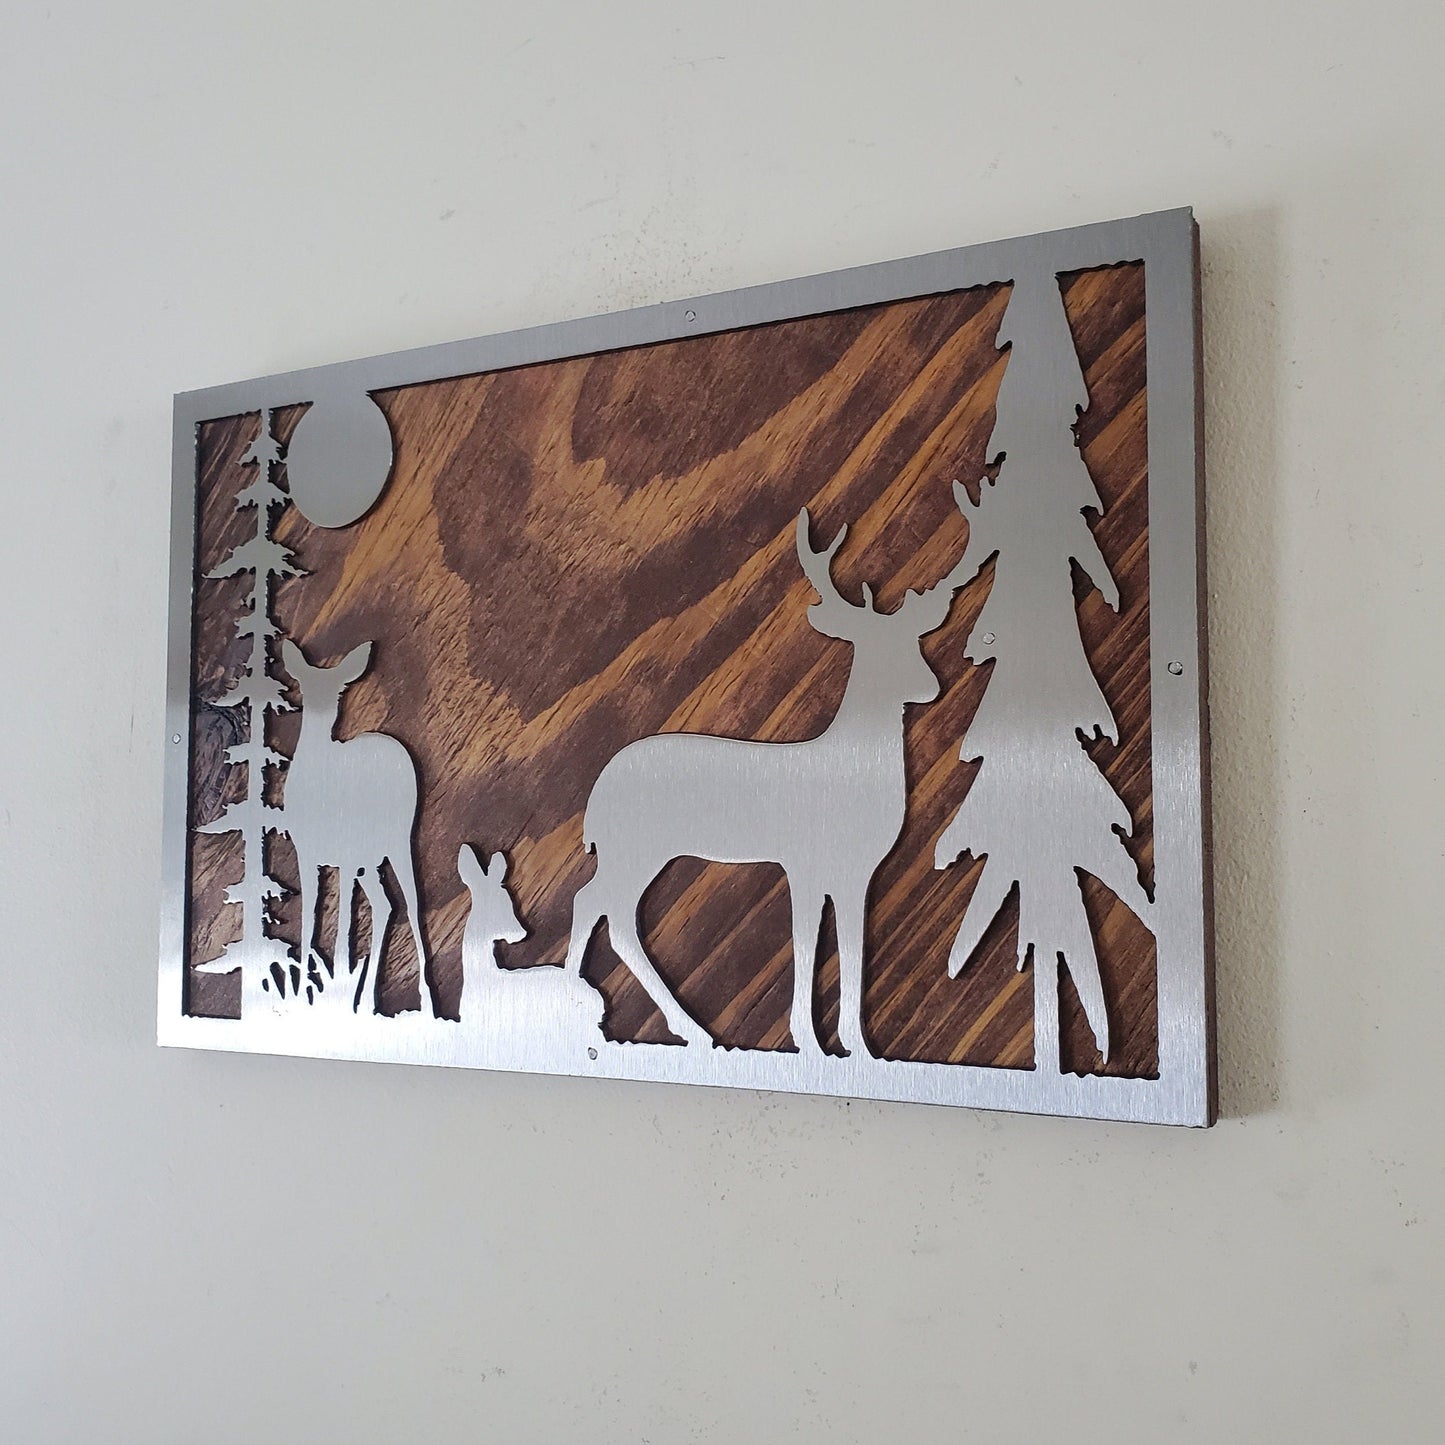 Metal art wall decor featuring a detailed and textured depiction of a deer in the woods, made of clear coated steel with rustic wood back.  A striking and unique piece, ideal for nature and outdoor enthusiasts.